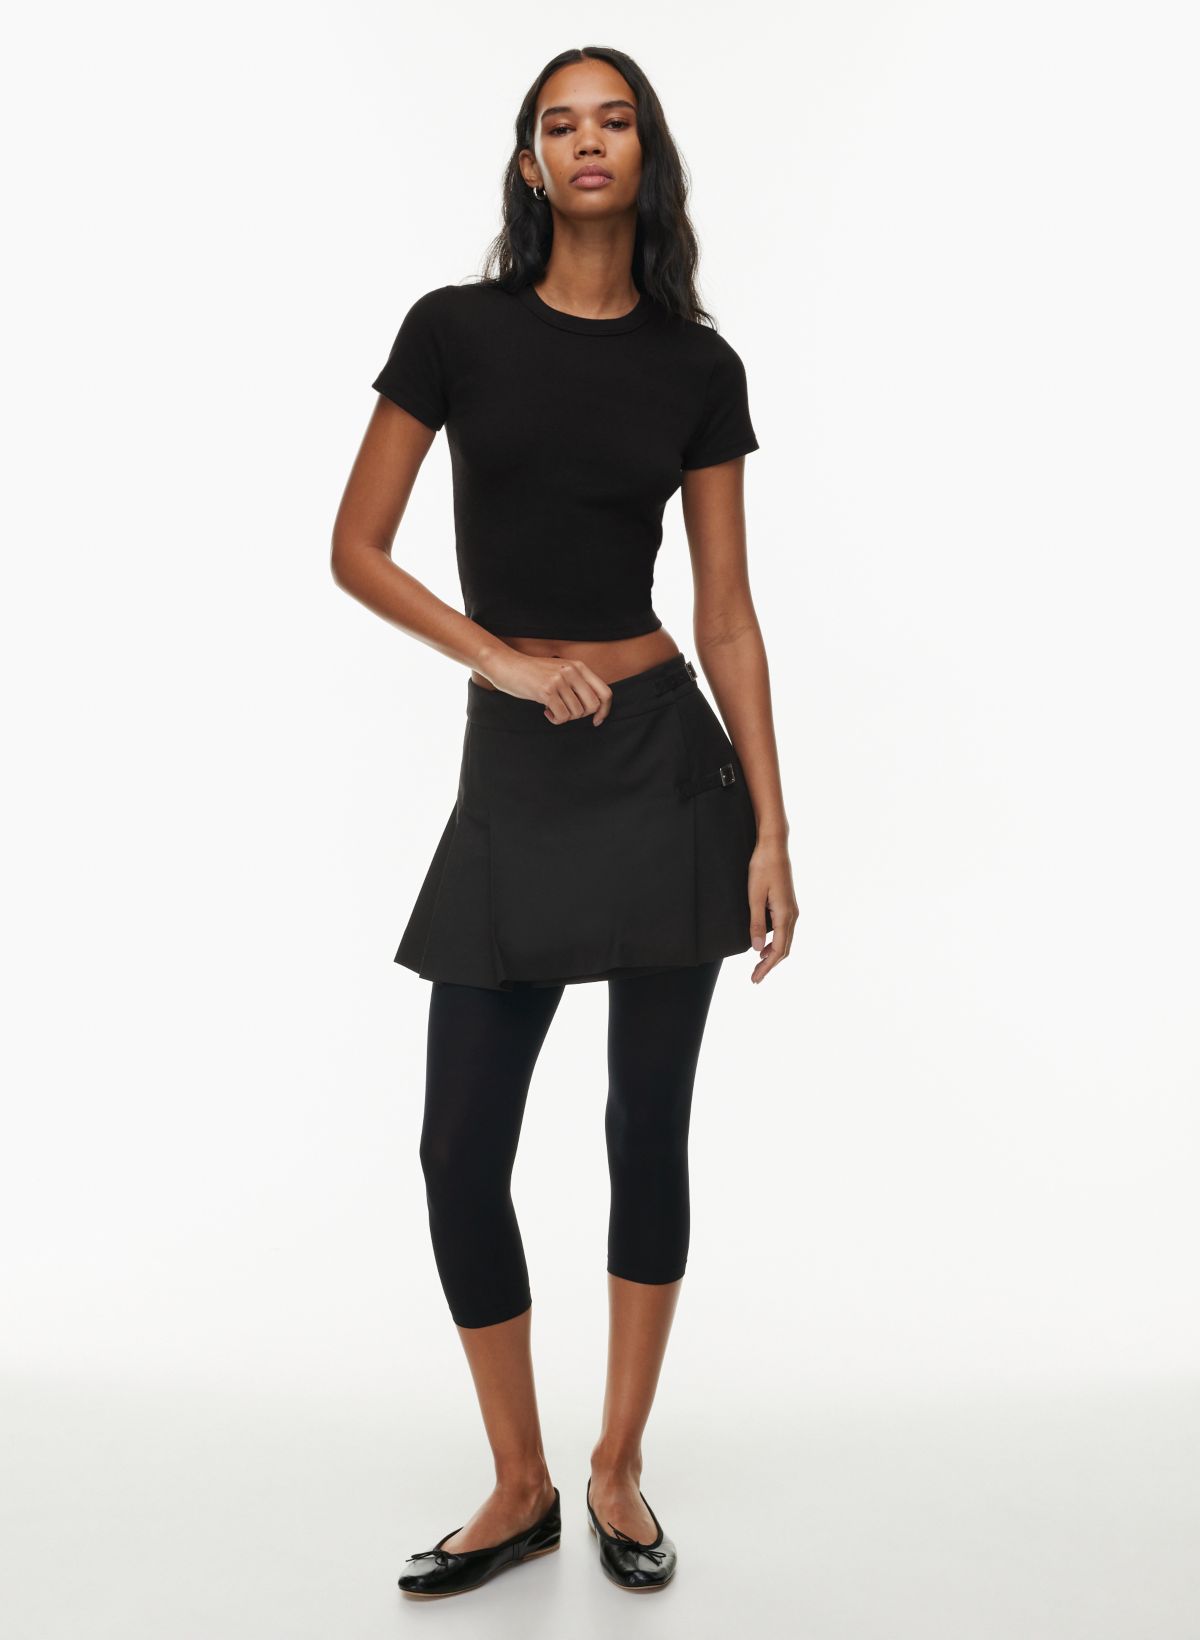 Do All Things Mid Thigh Shorts (Black) – Sunday's Best Boutique